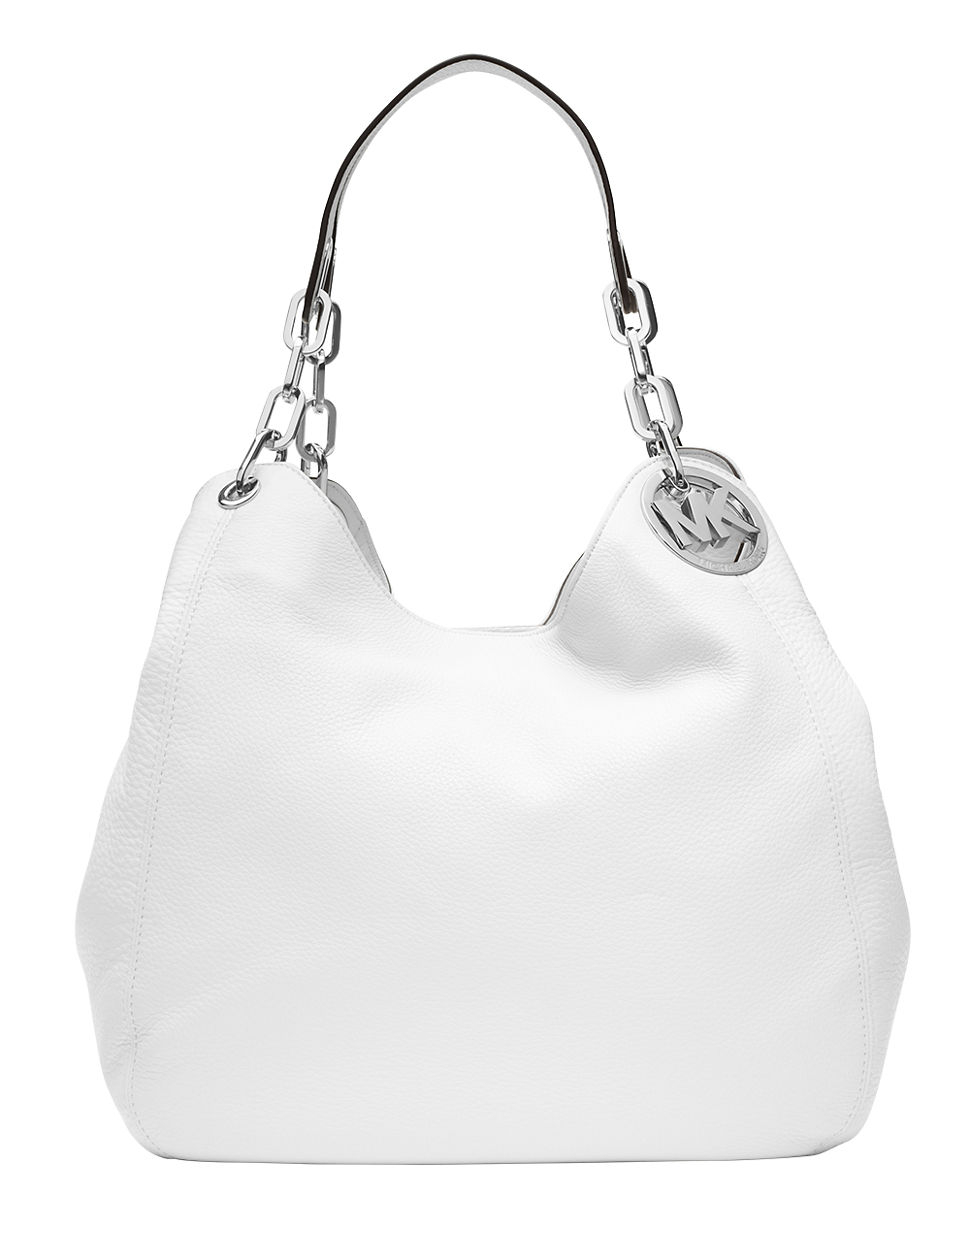 Lyst - Michael michael kors Fulton Leather Large Tote Bag in White